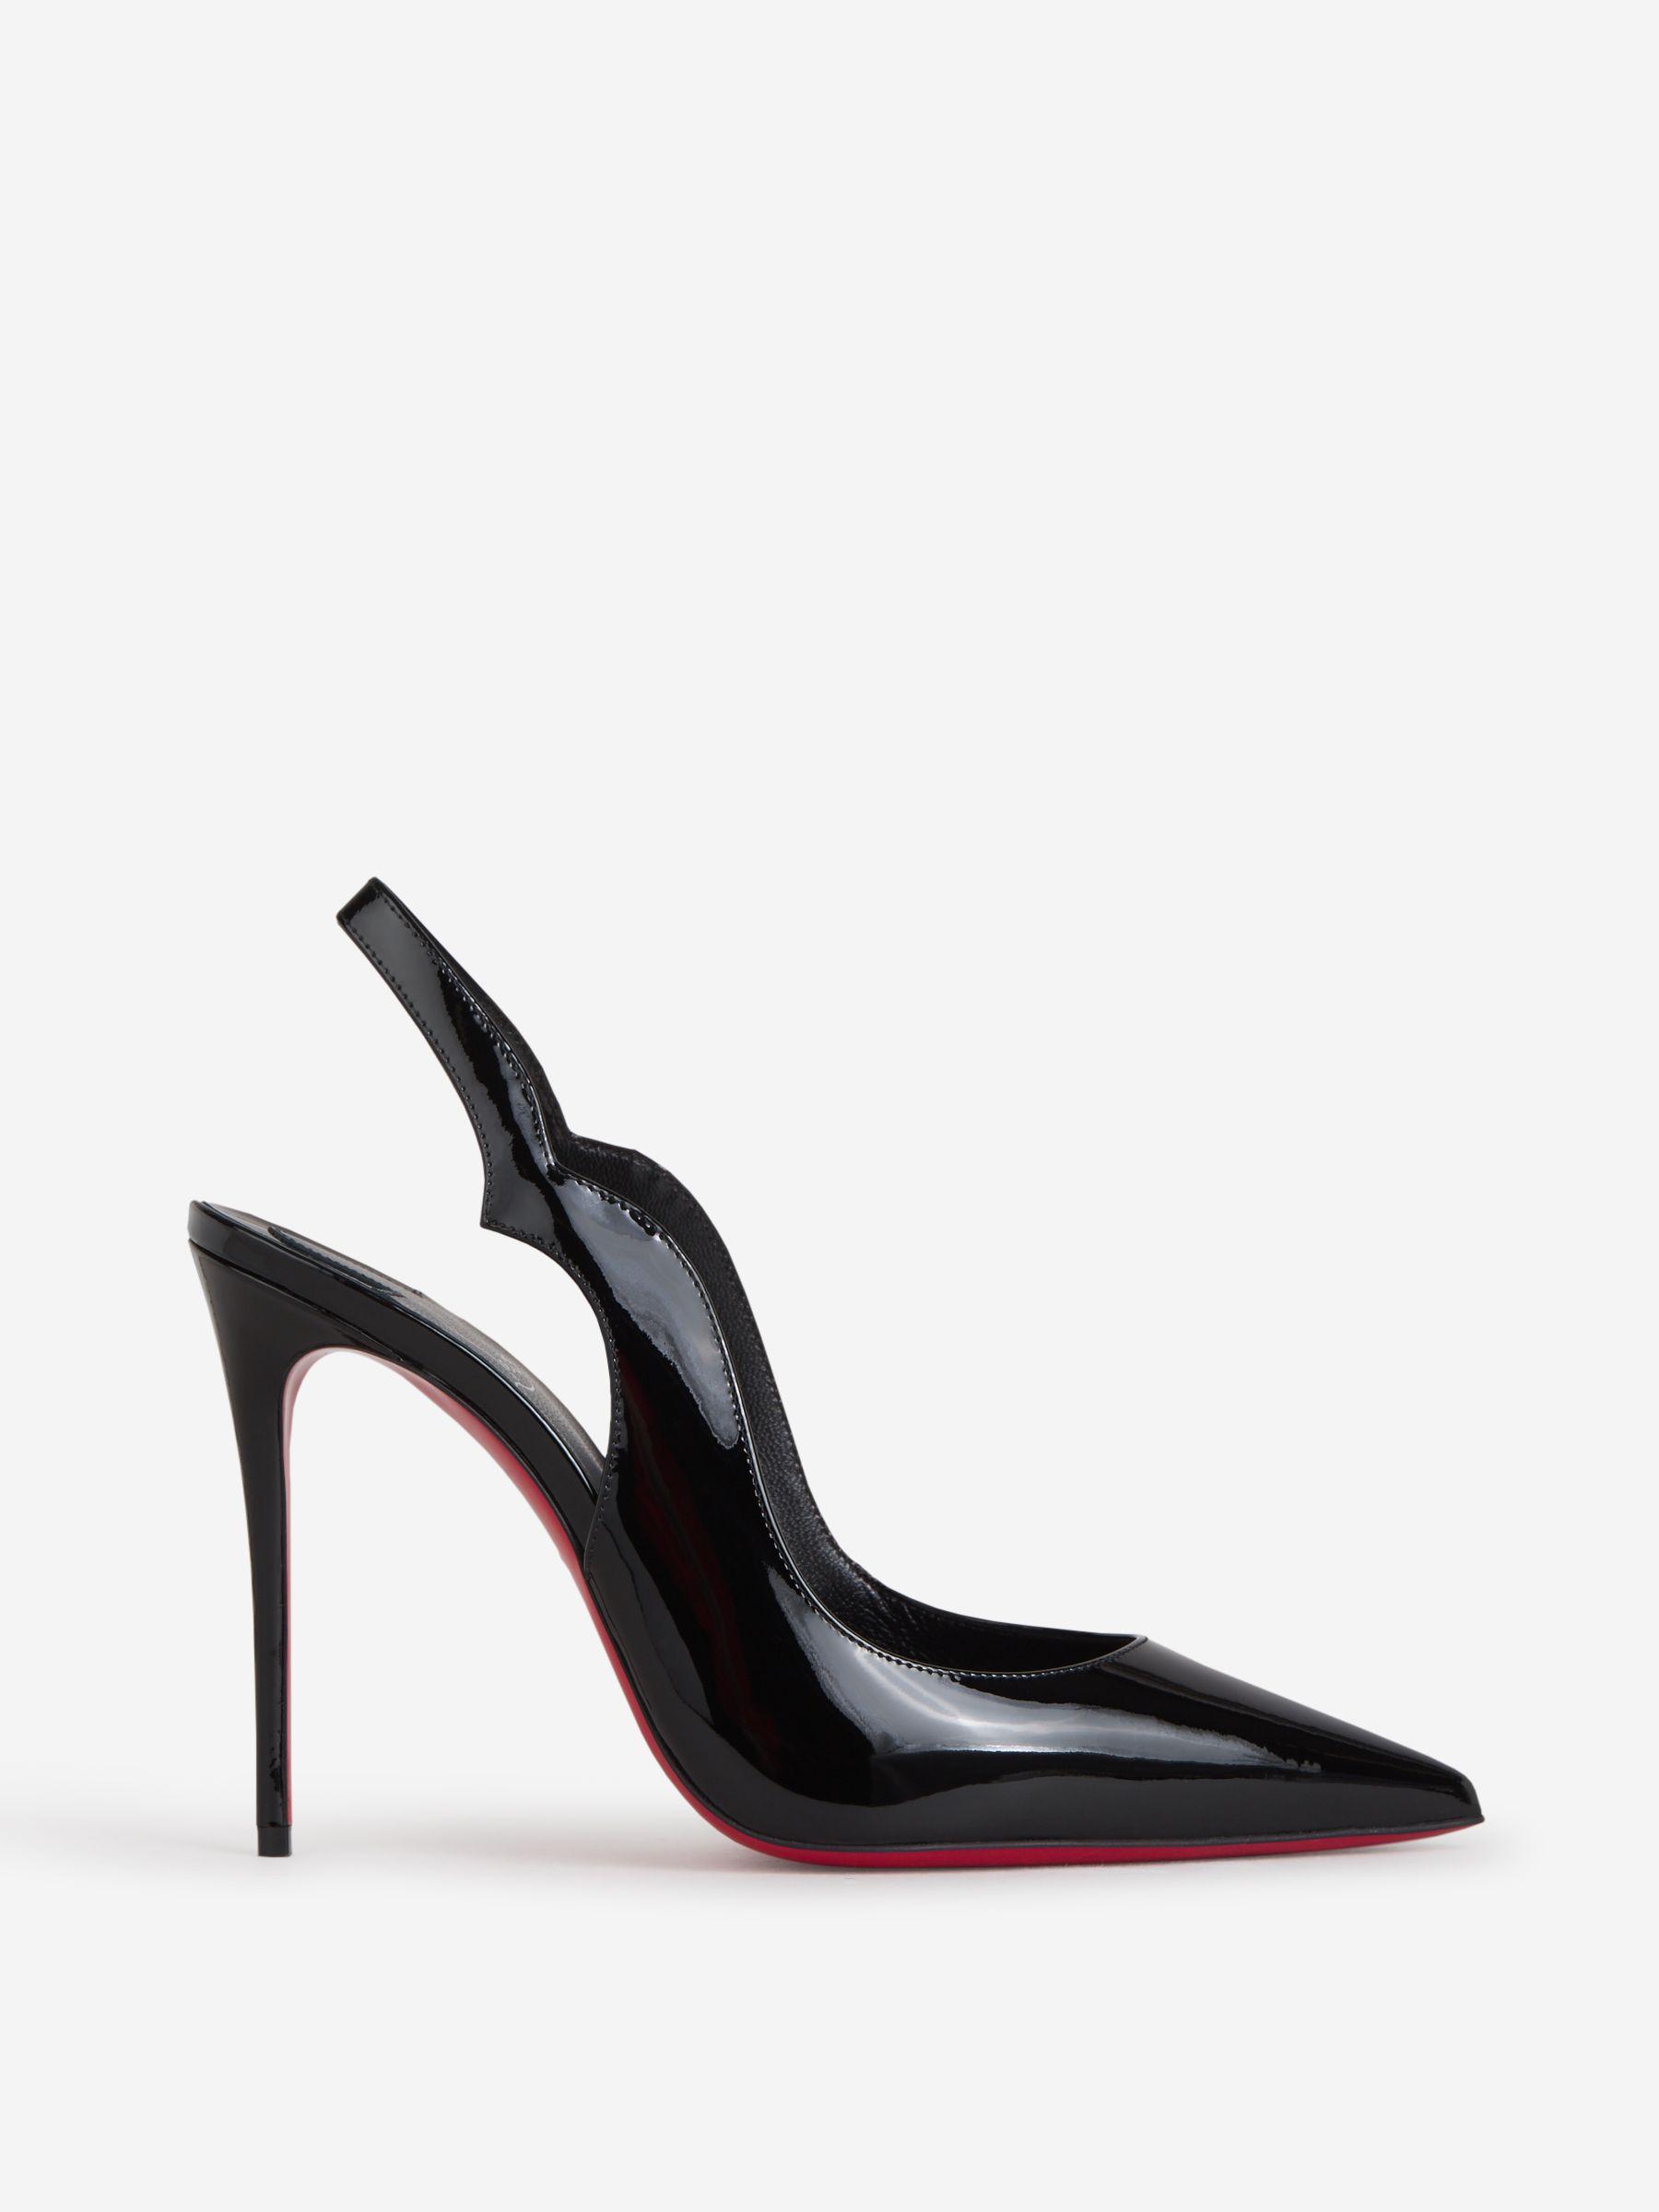 Christian Louboutin Leather Hot Chick Sling Shoes in Black | Lyst